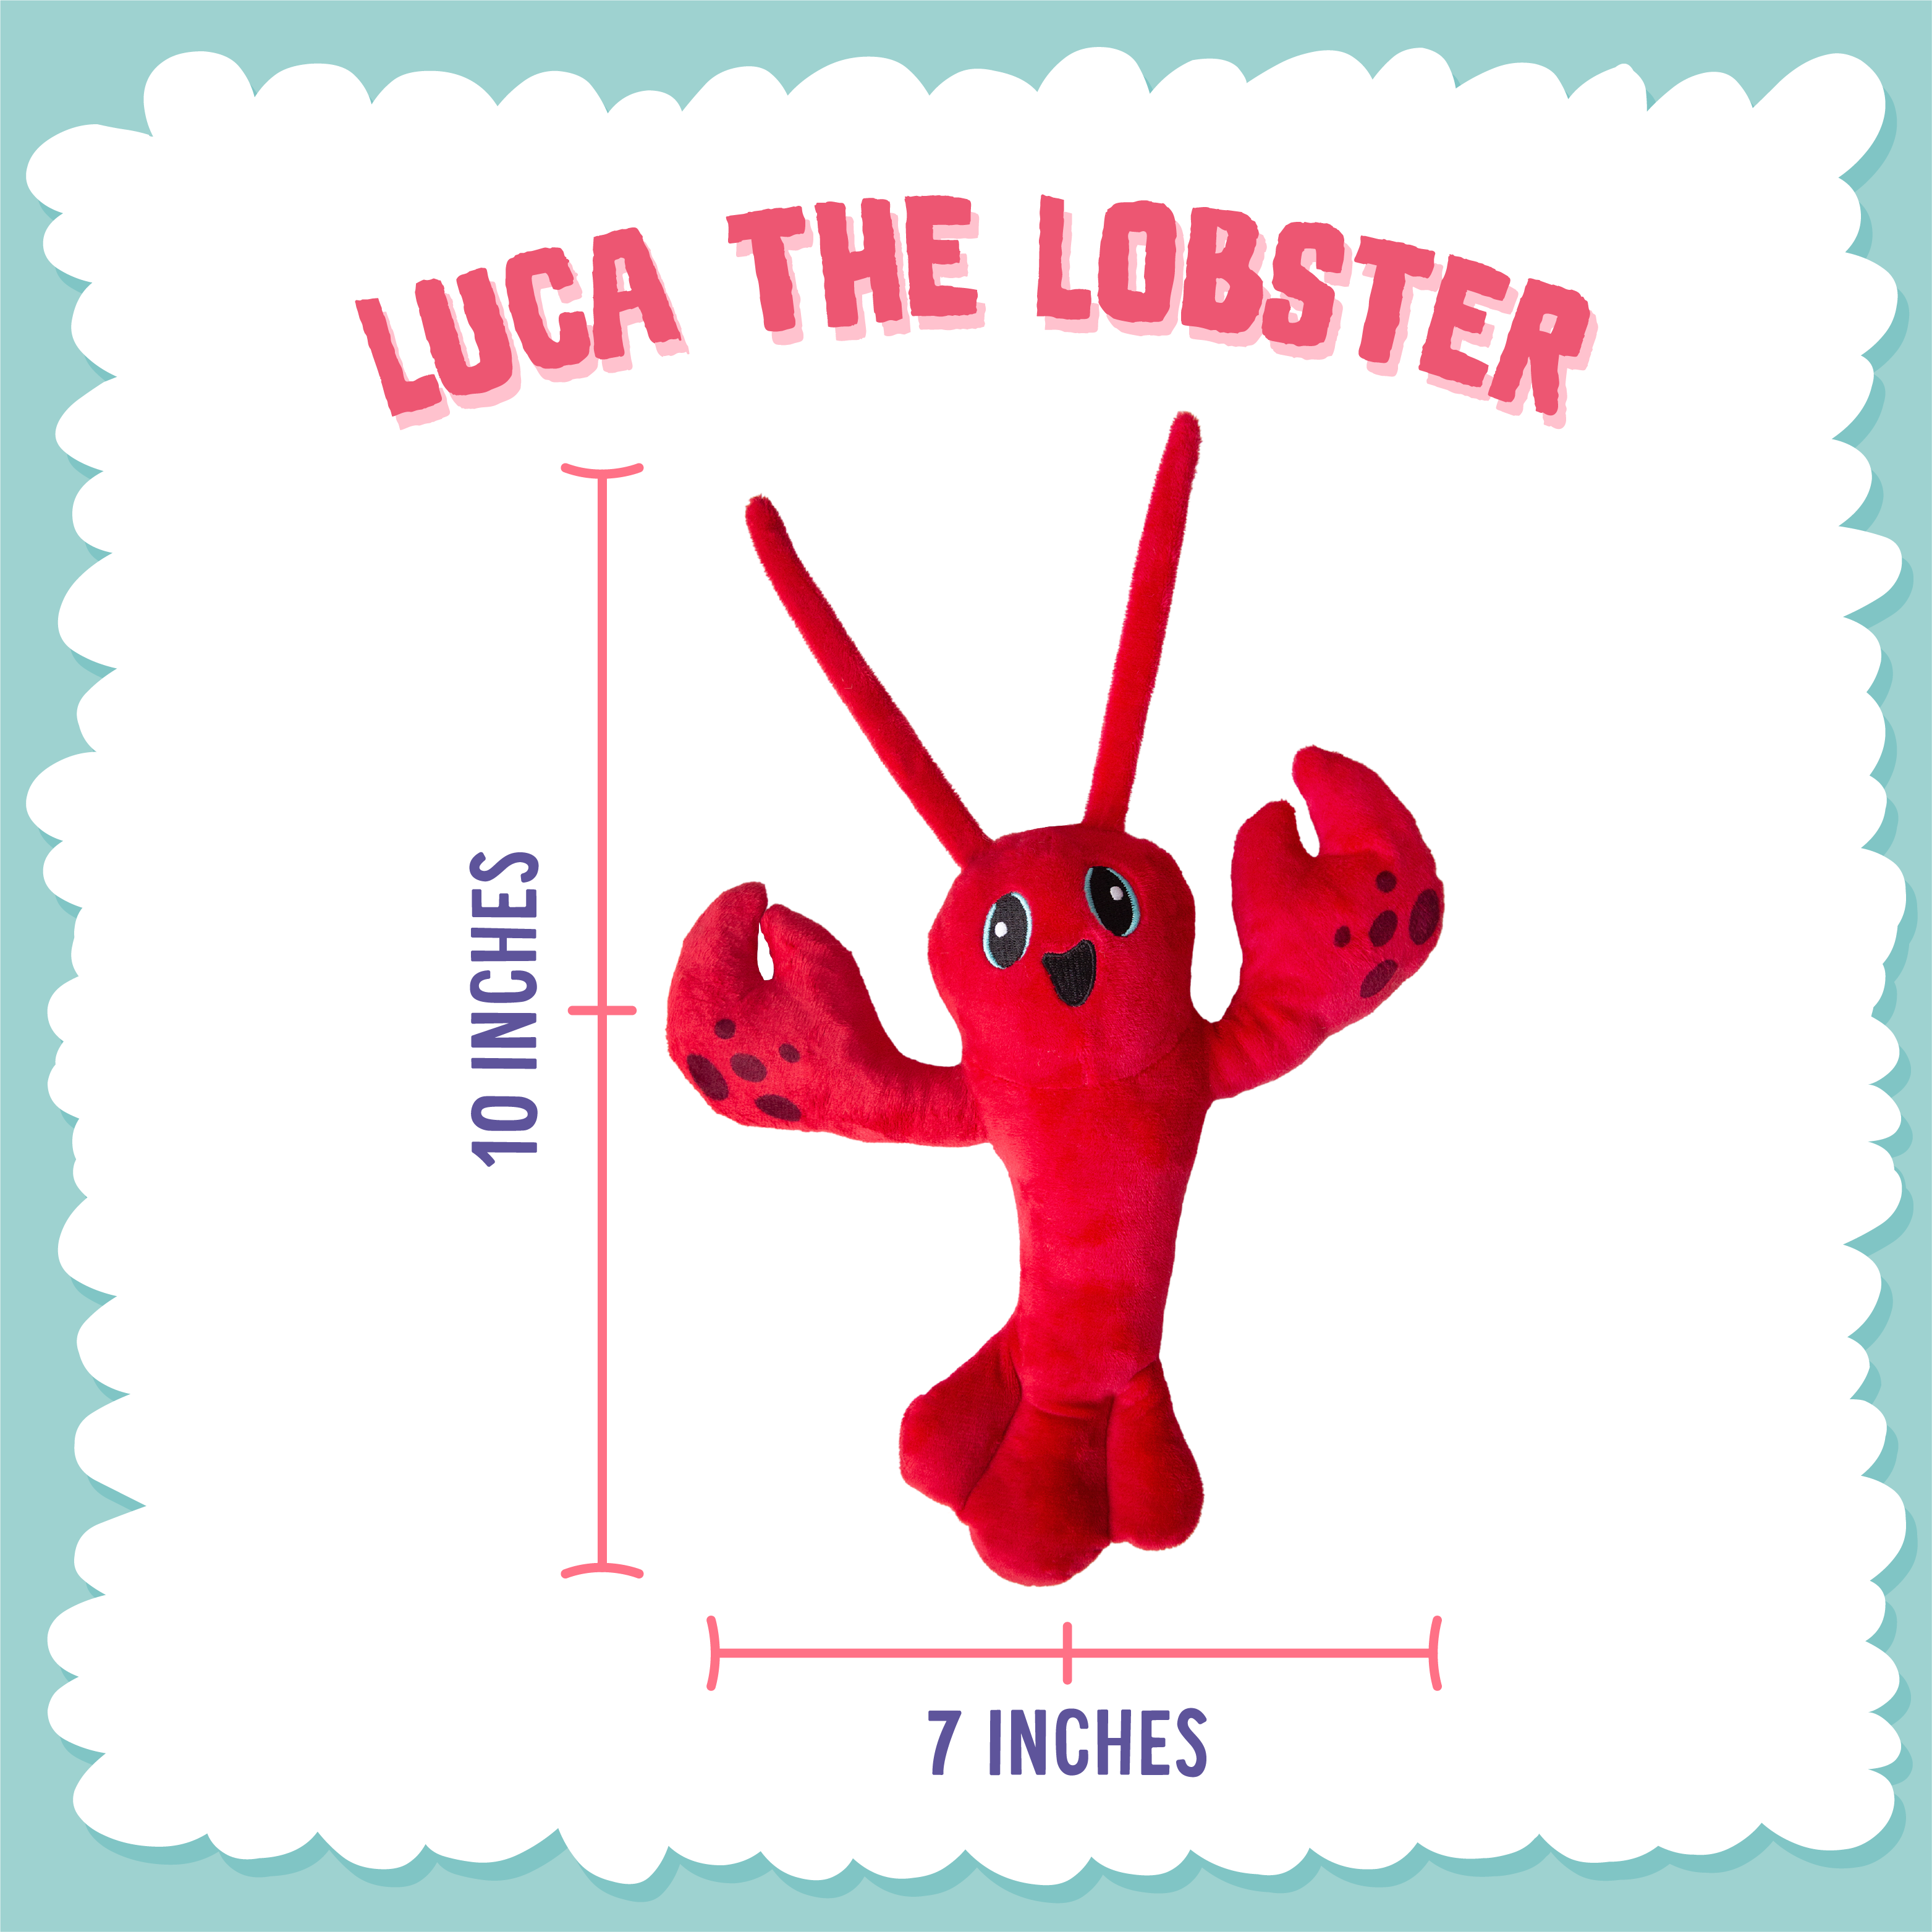 Luca the Lobster